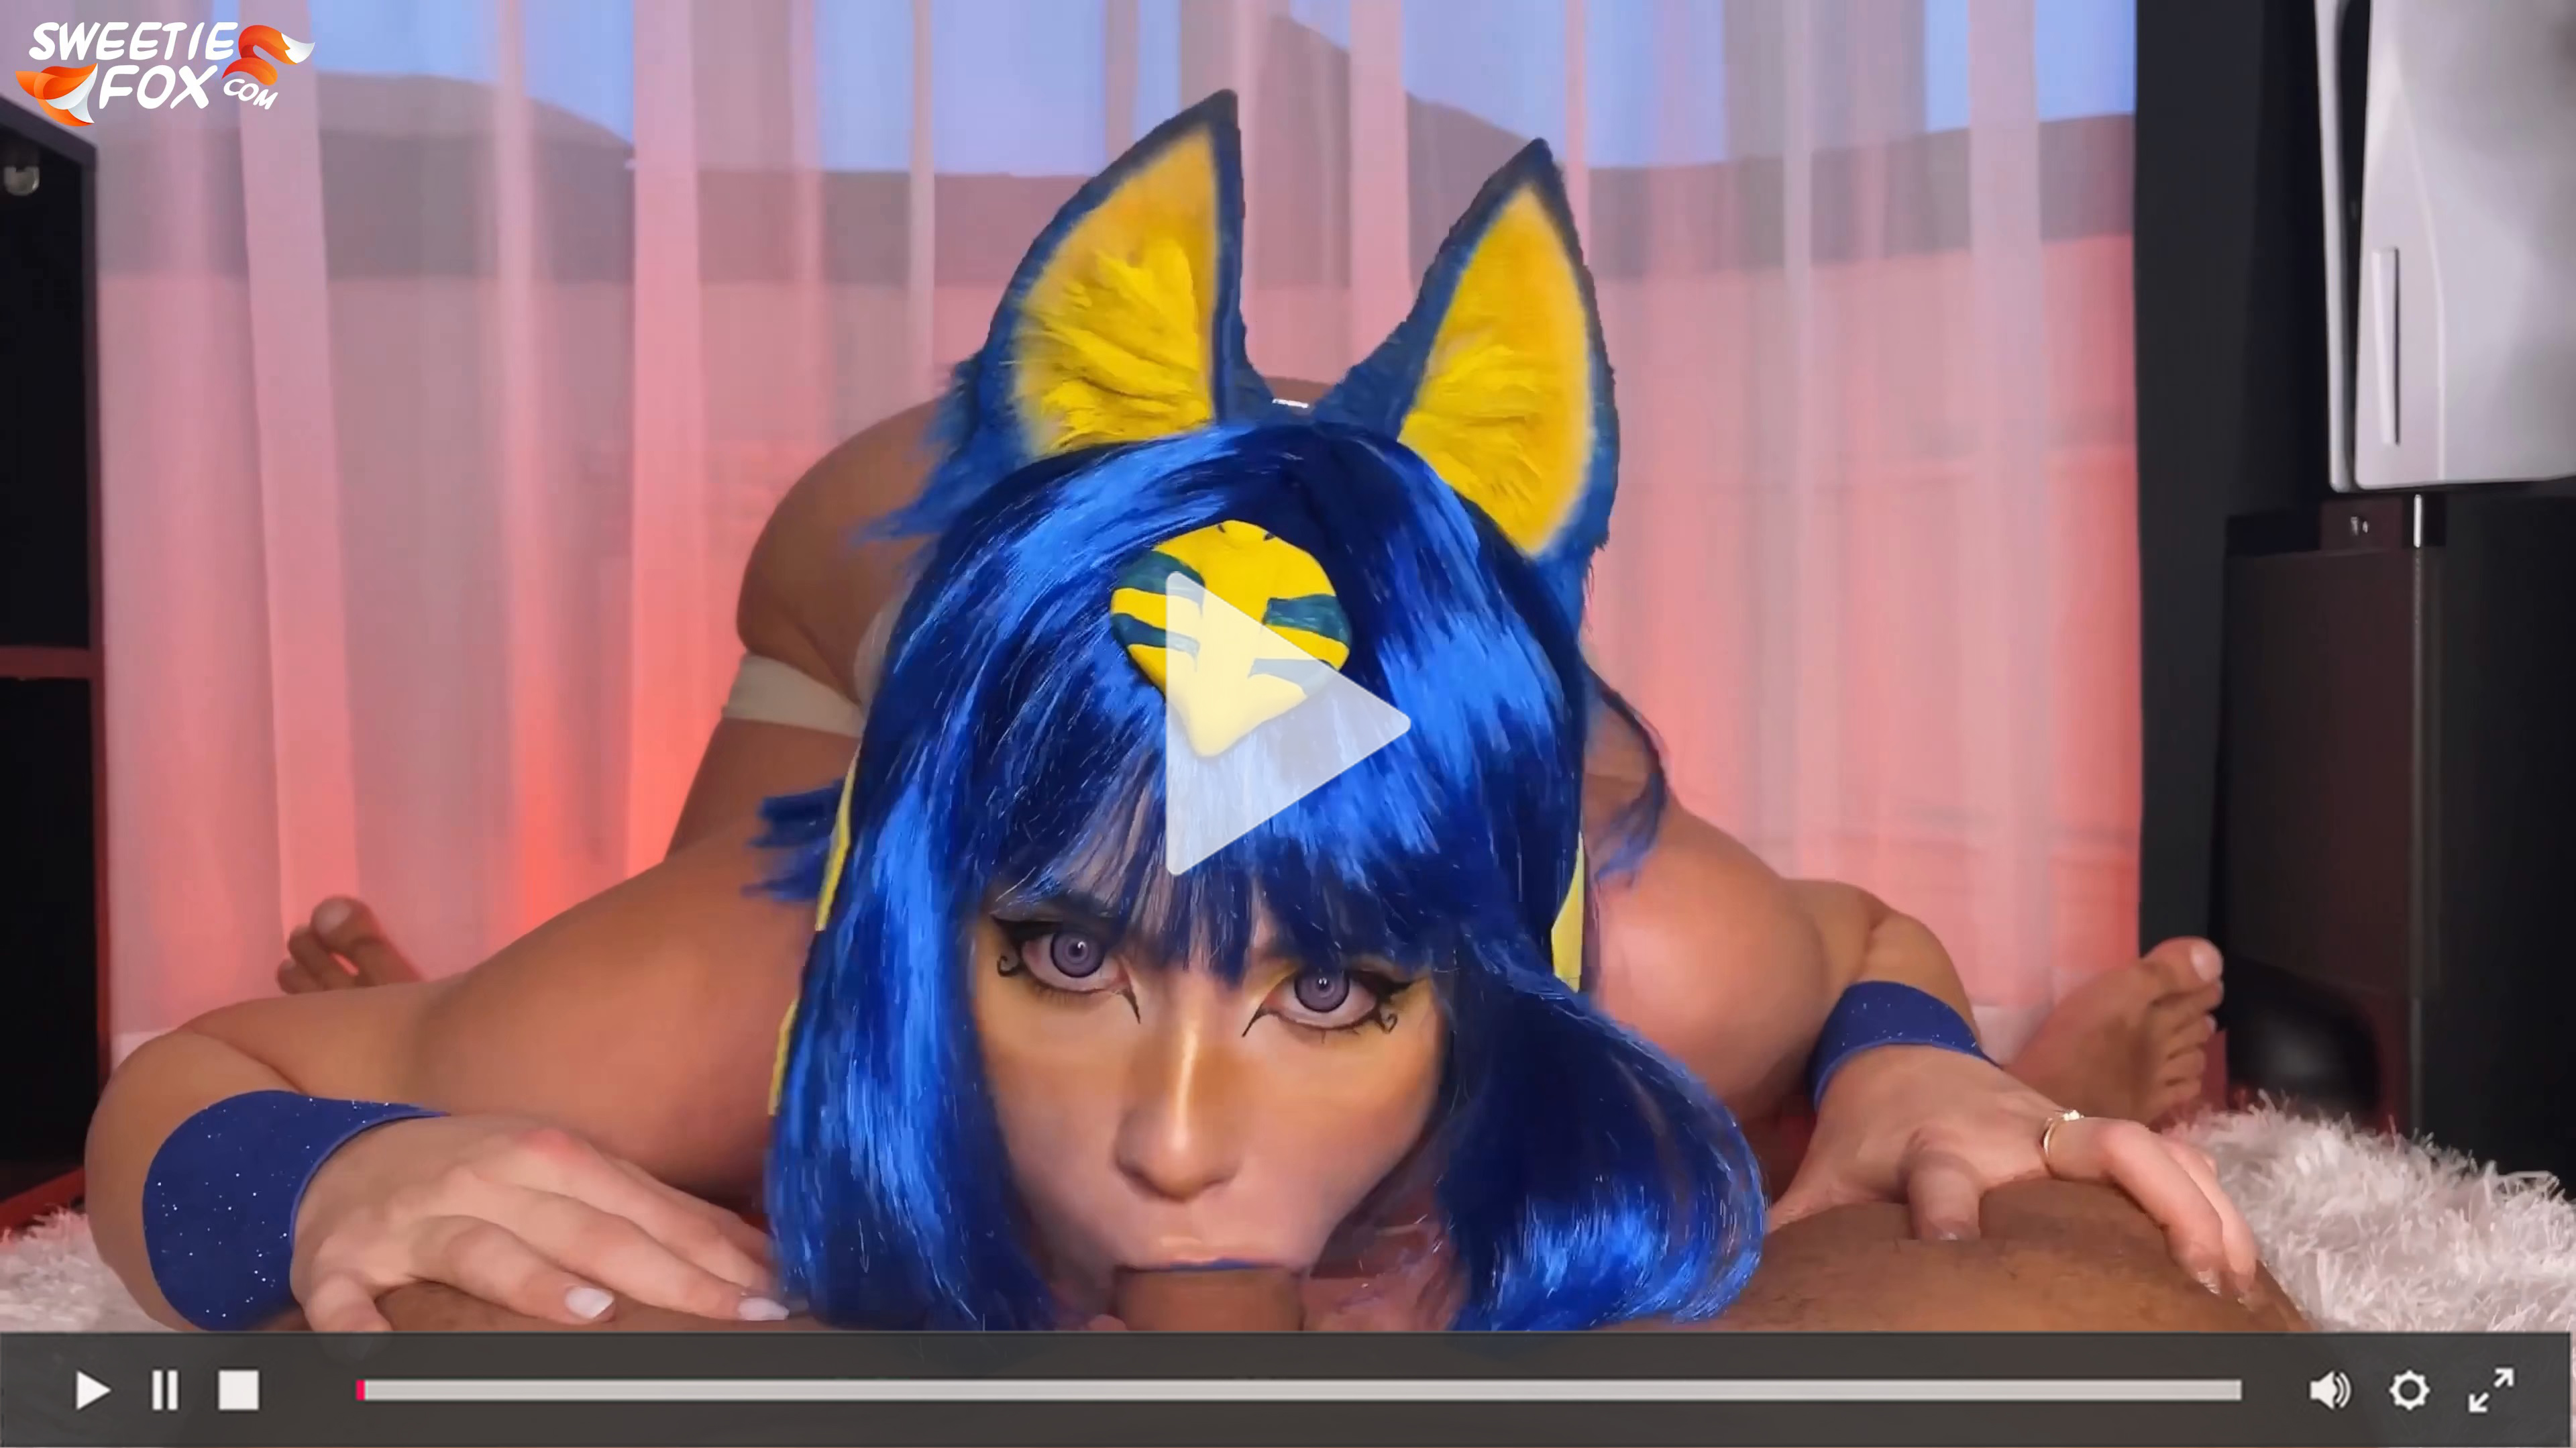 Sweetie_Fox_-_Cosplay_Ankha_Cowgirl_And_Deep_Blowjob